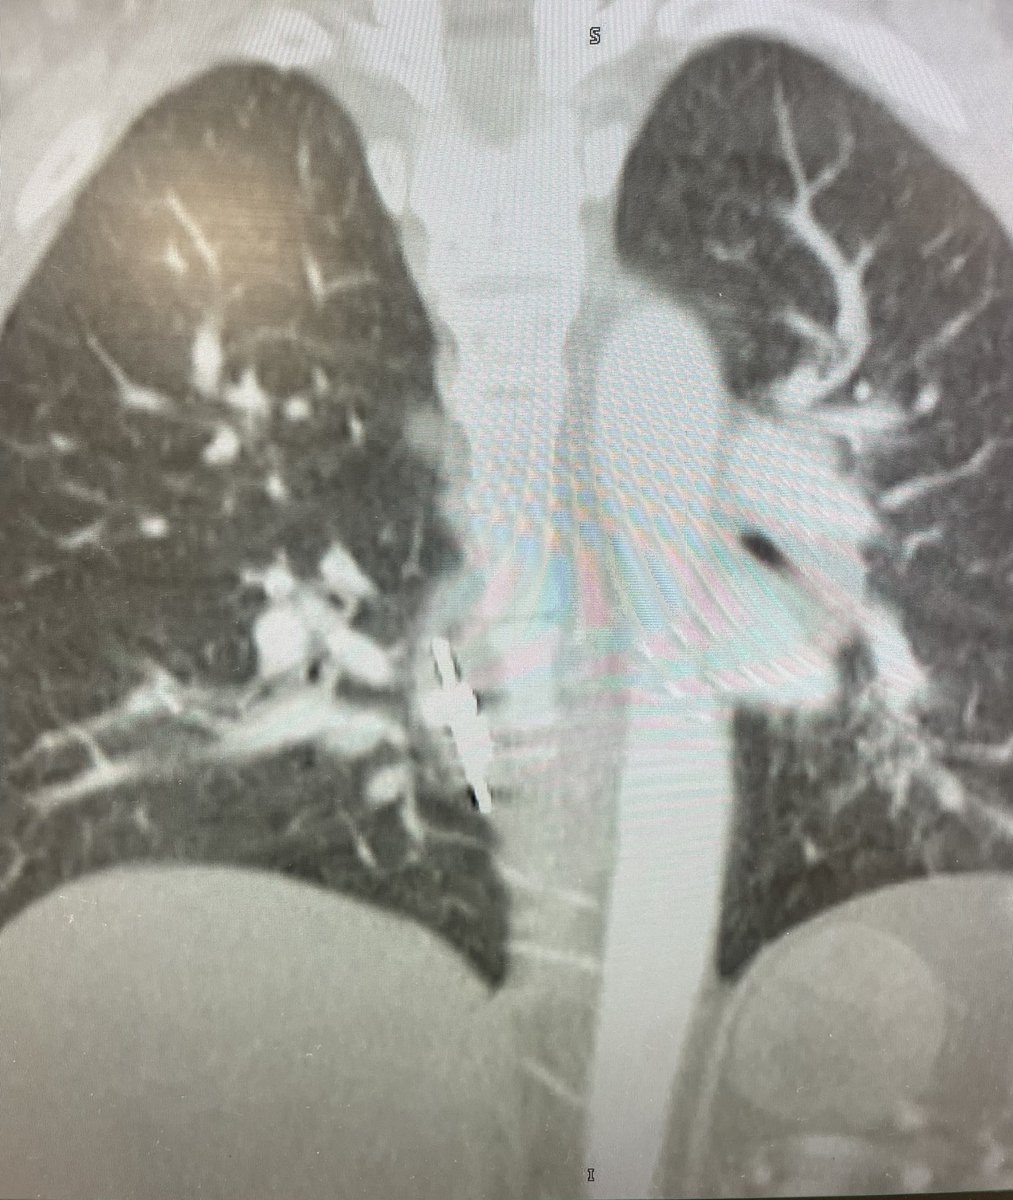 #GITwitter 40F with GERD & language barrier pw burning with PO but tolerating purée, no nausea or emesis. Exam benign. ED scans patient and call you for esophageal foreign body. Diagnosis ⁉️ #MedTwitter